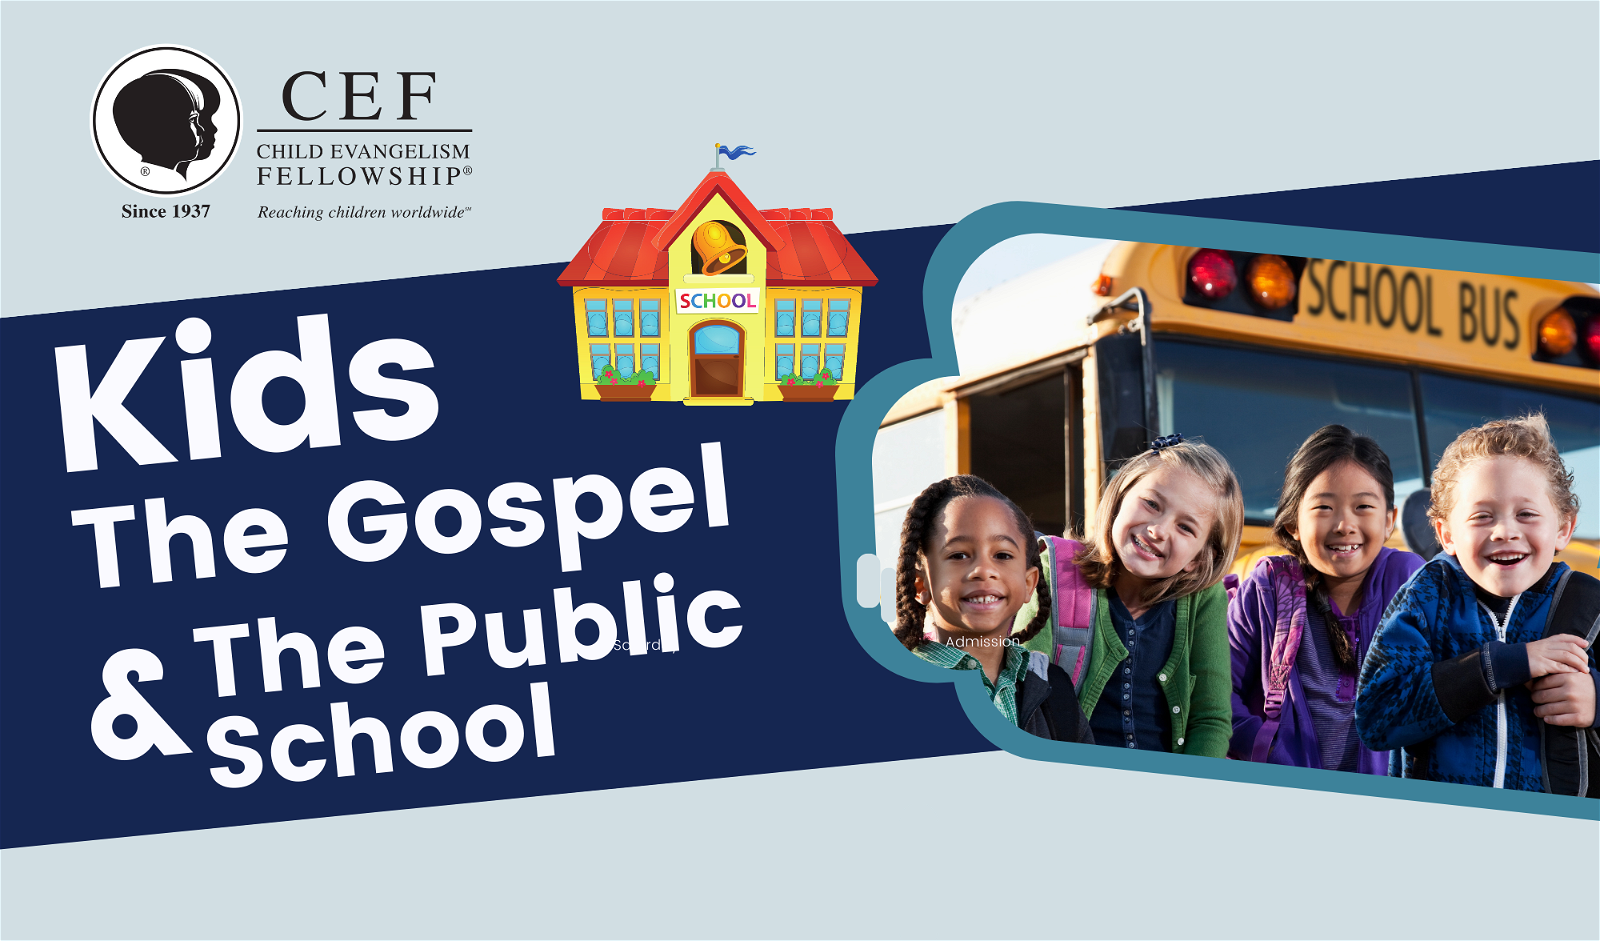 Seminar Title: Kids, The Gospel & The Public School with a photo of 4 smiling children standing in front of a school bus. Also includes a drawing of a school.